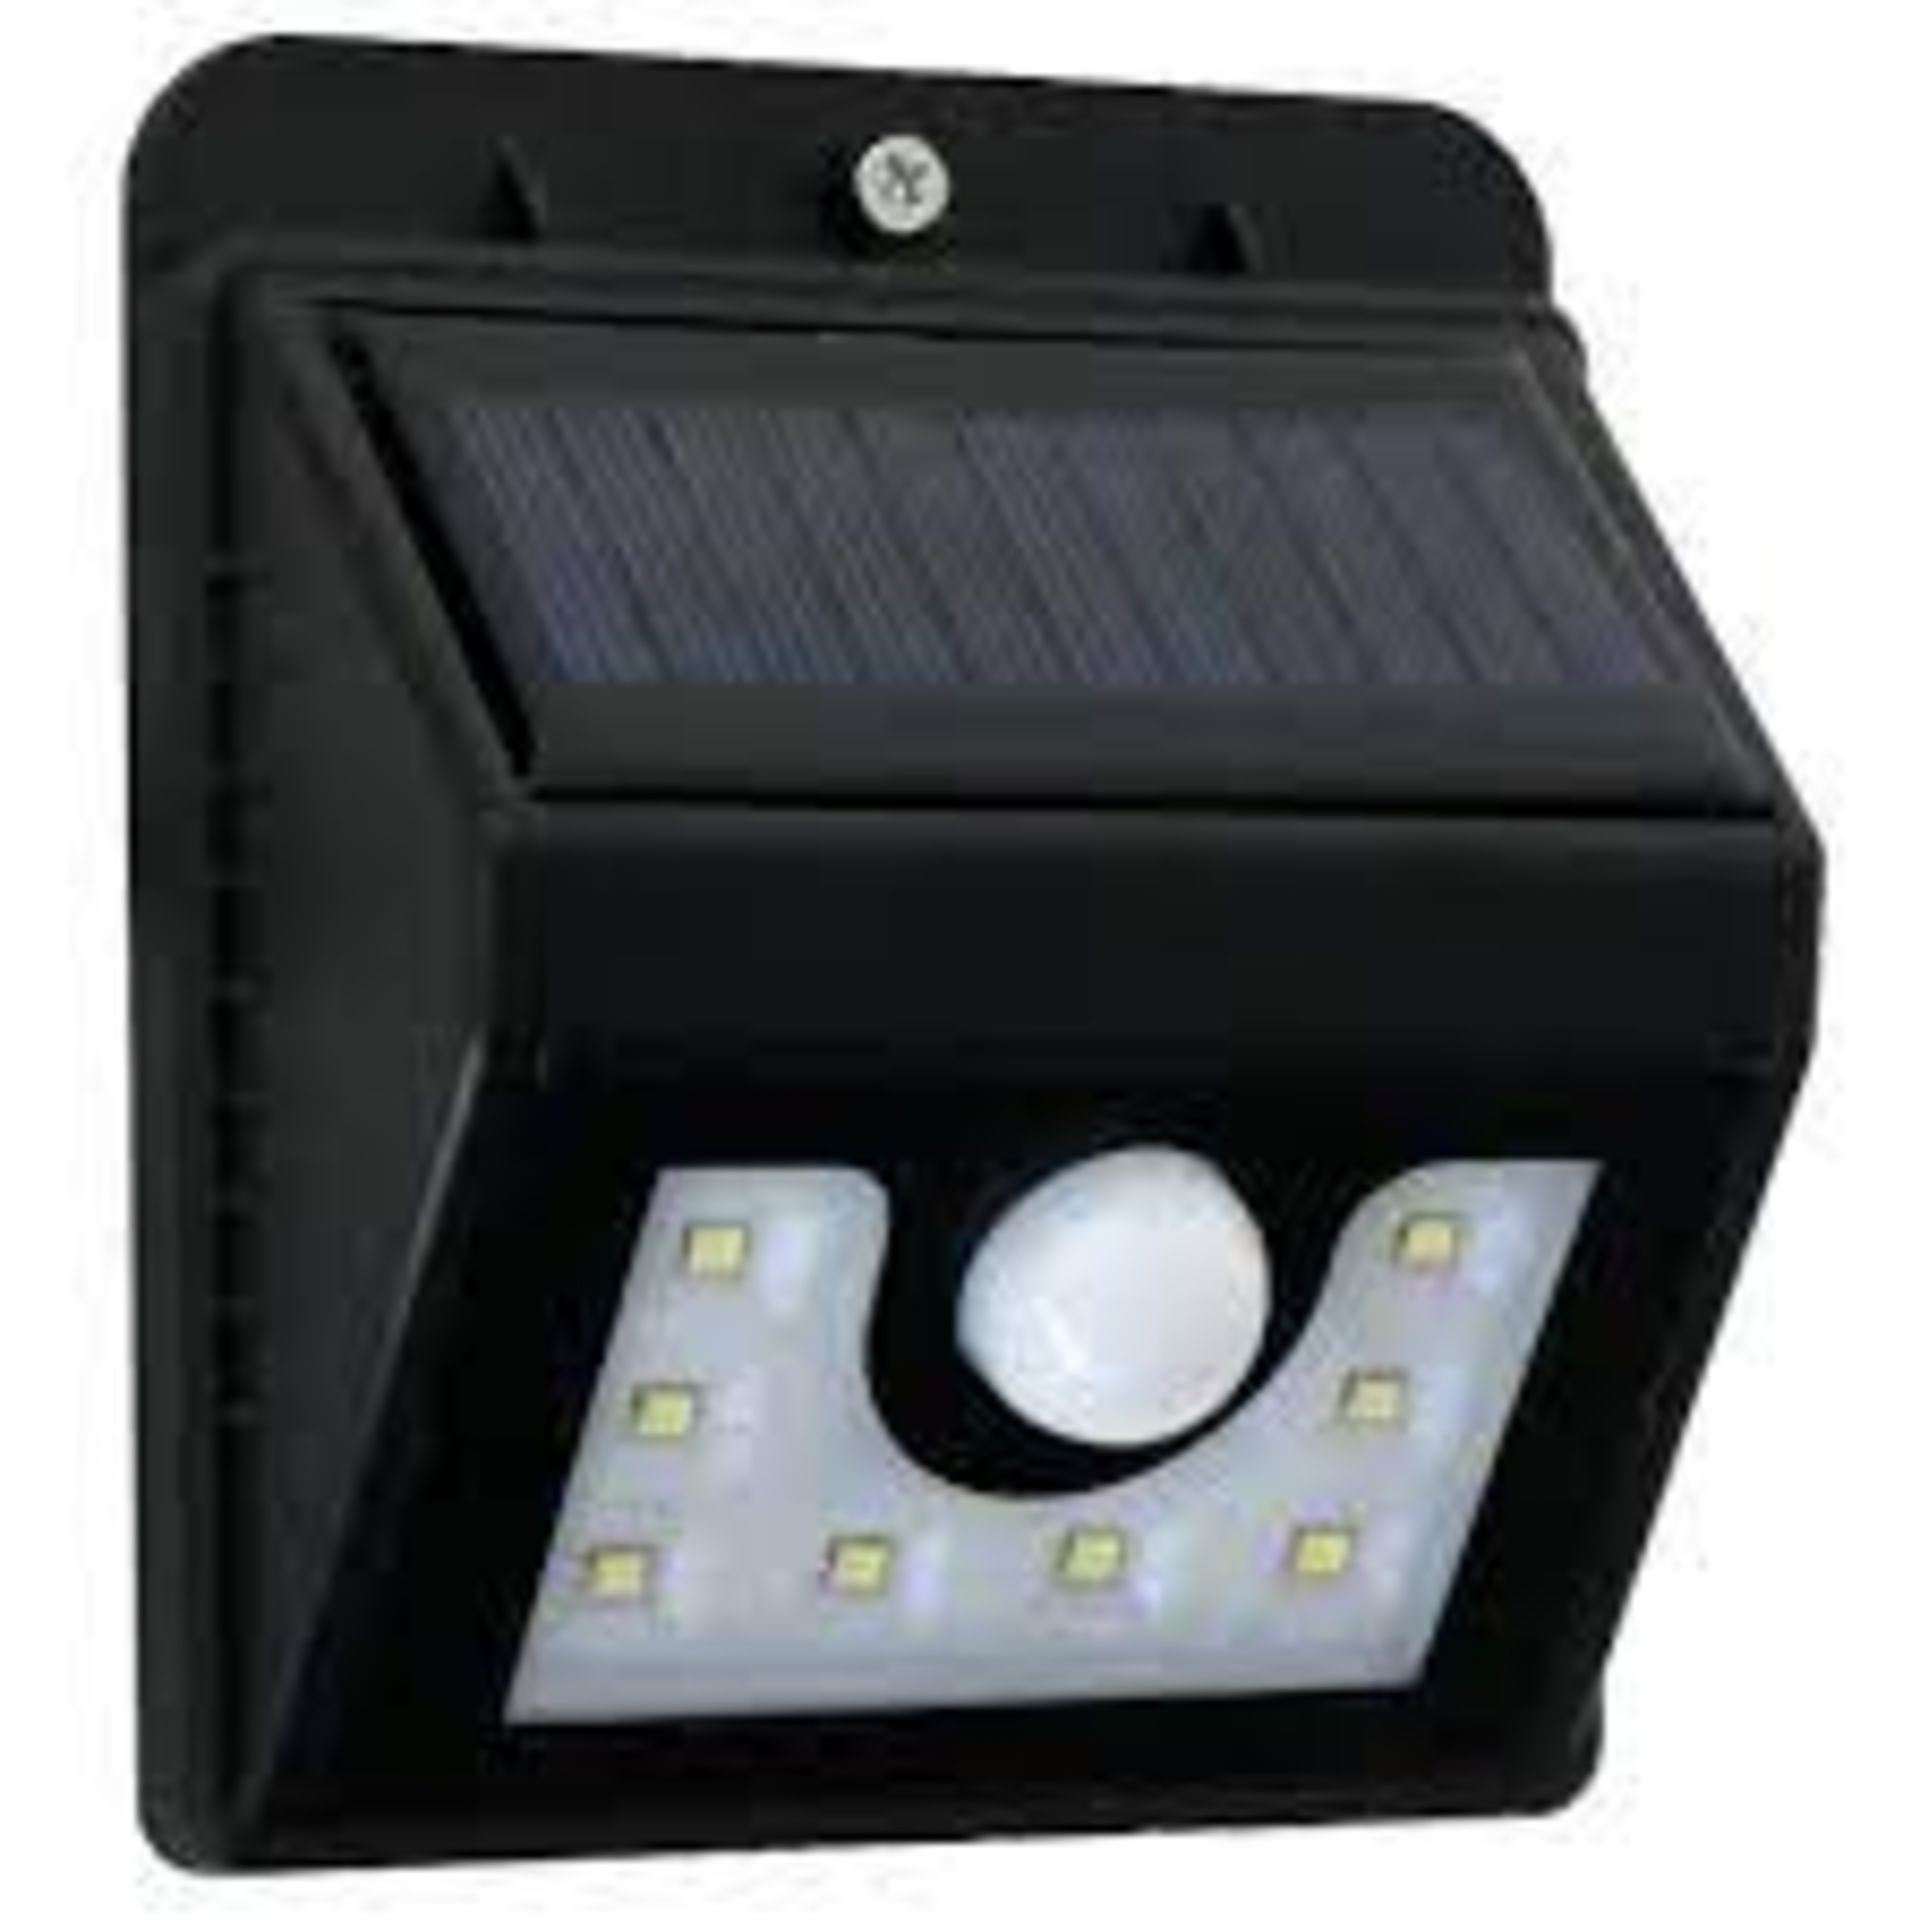 3 X BRAND NEW PACKS OF 2 Waterproof Wall Mounted Outdoor Solar Motion Sensor LED Light (4092) R2-1